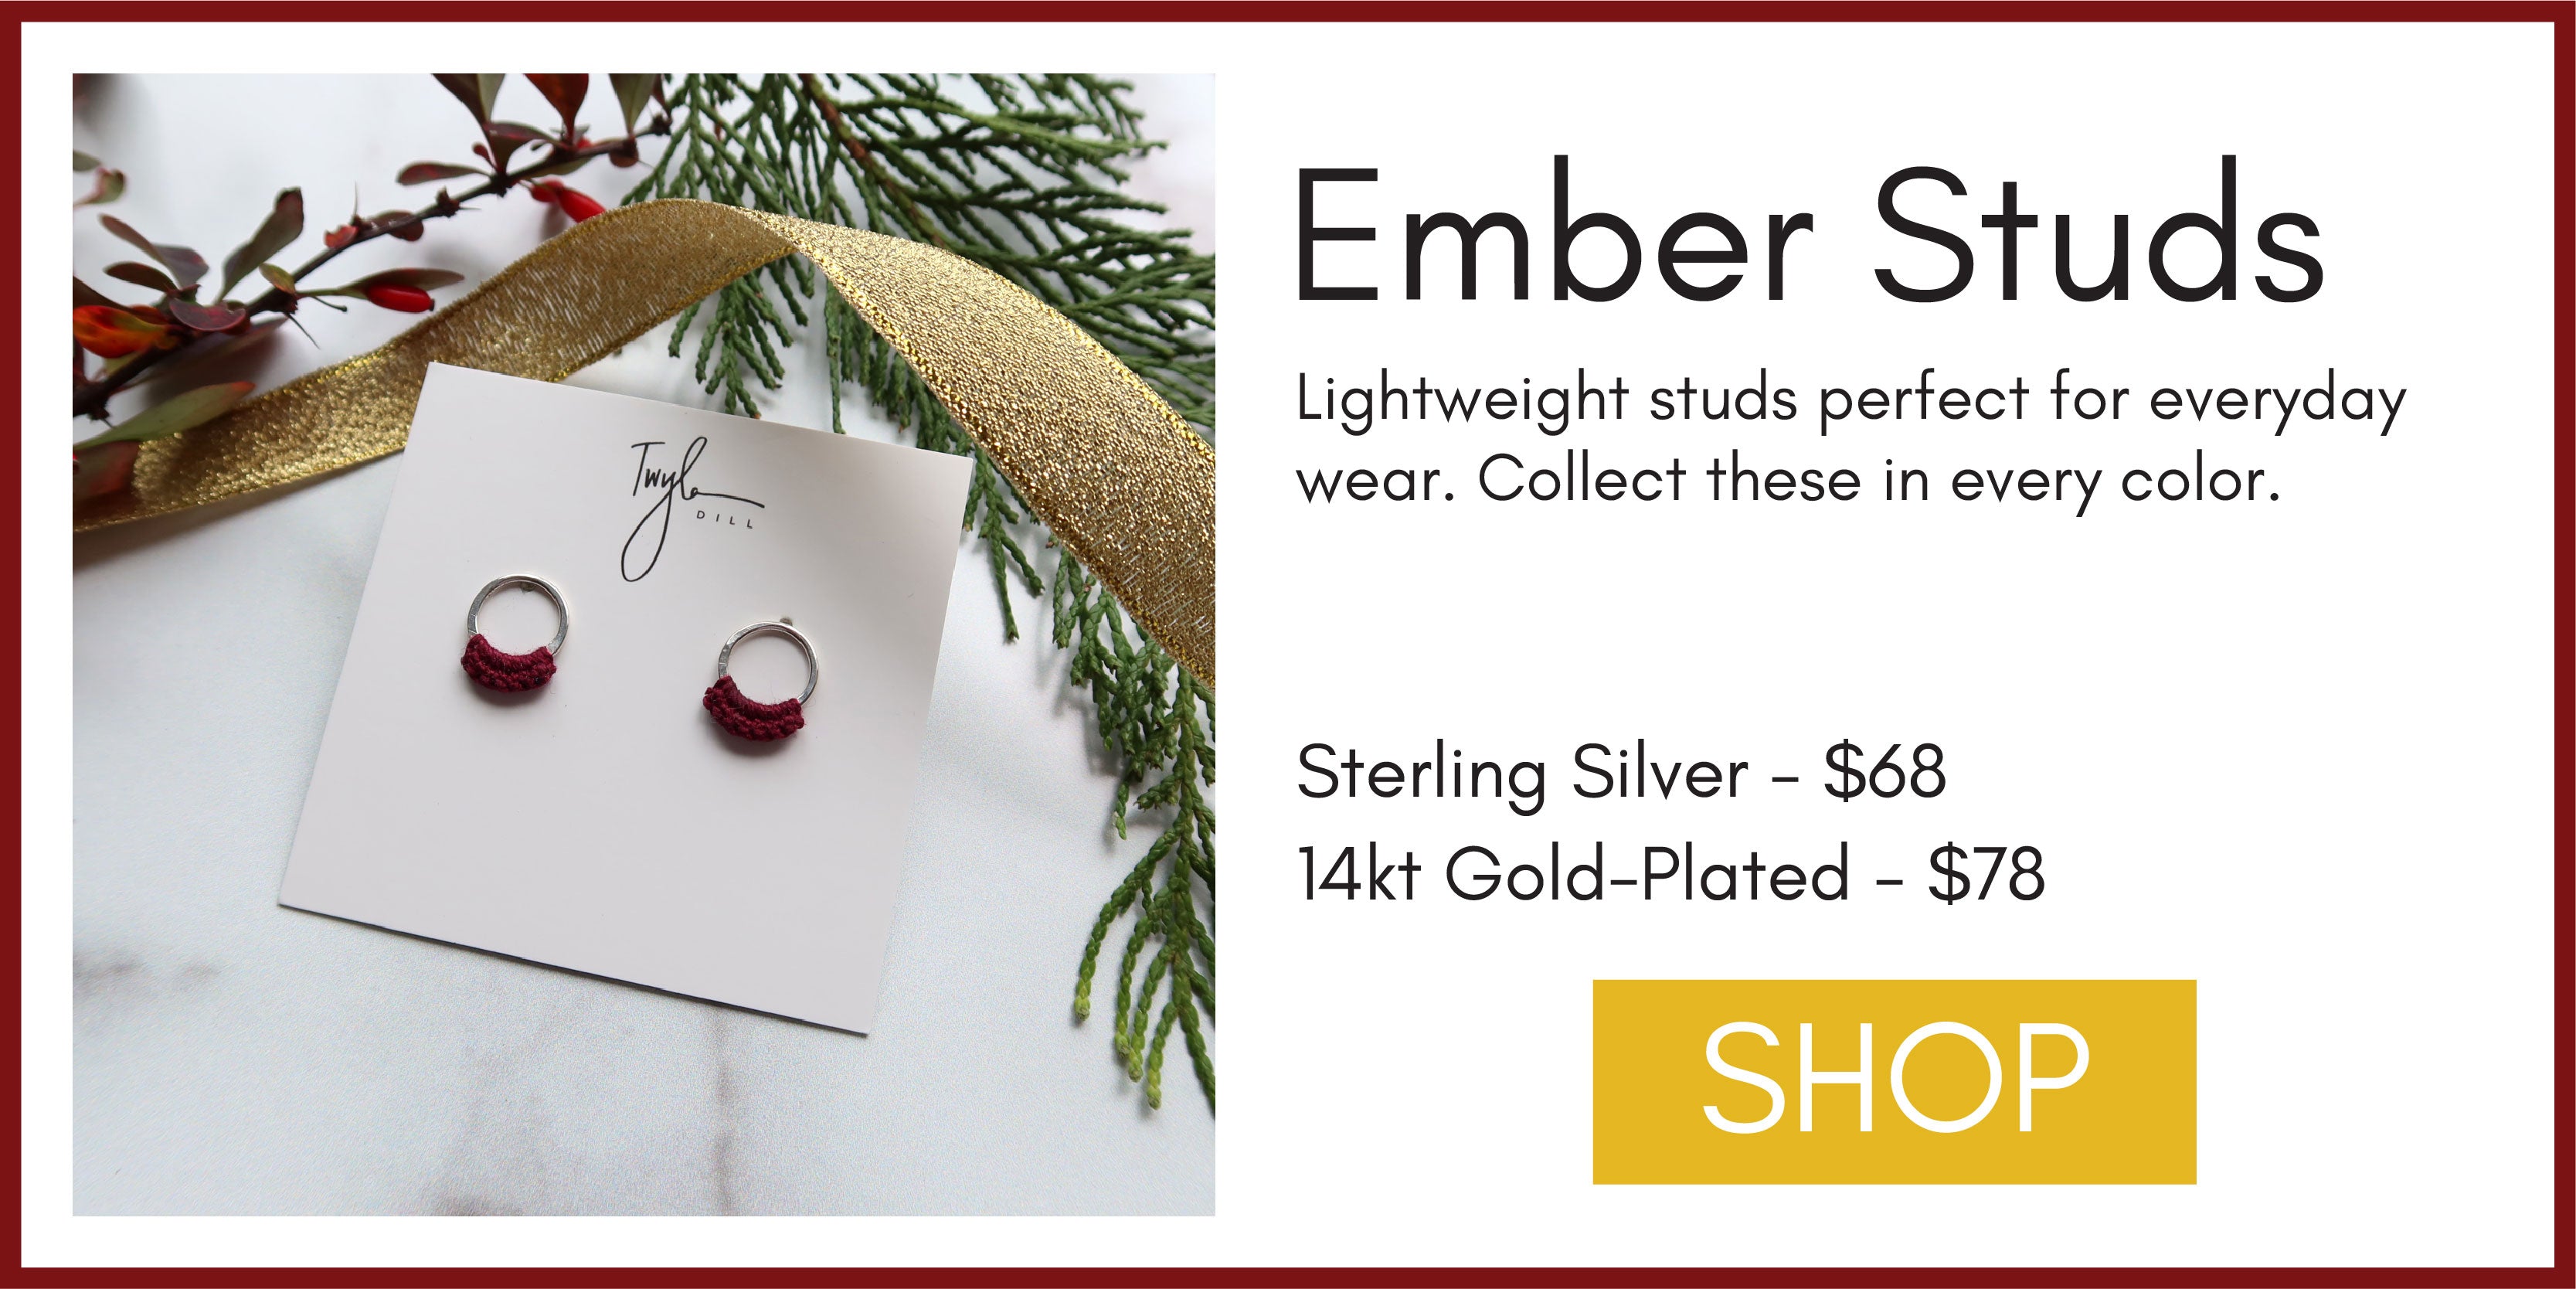 Graphic with title "Ember Studs" and an image that shows the Ember Studs in Wine on a jewelry card with holiday greenery in the background